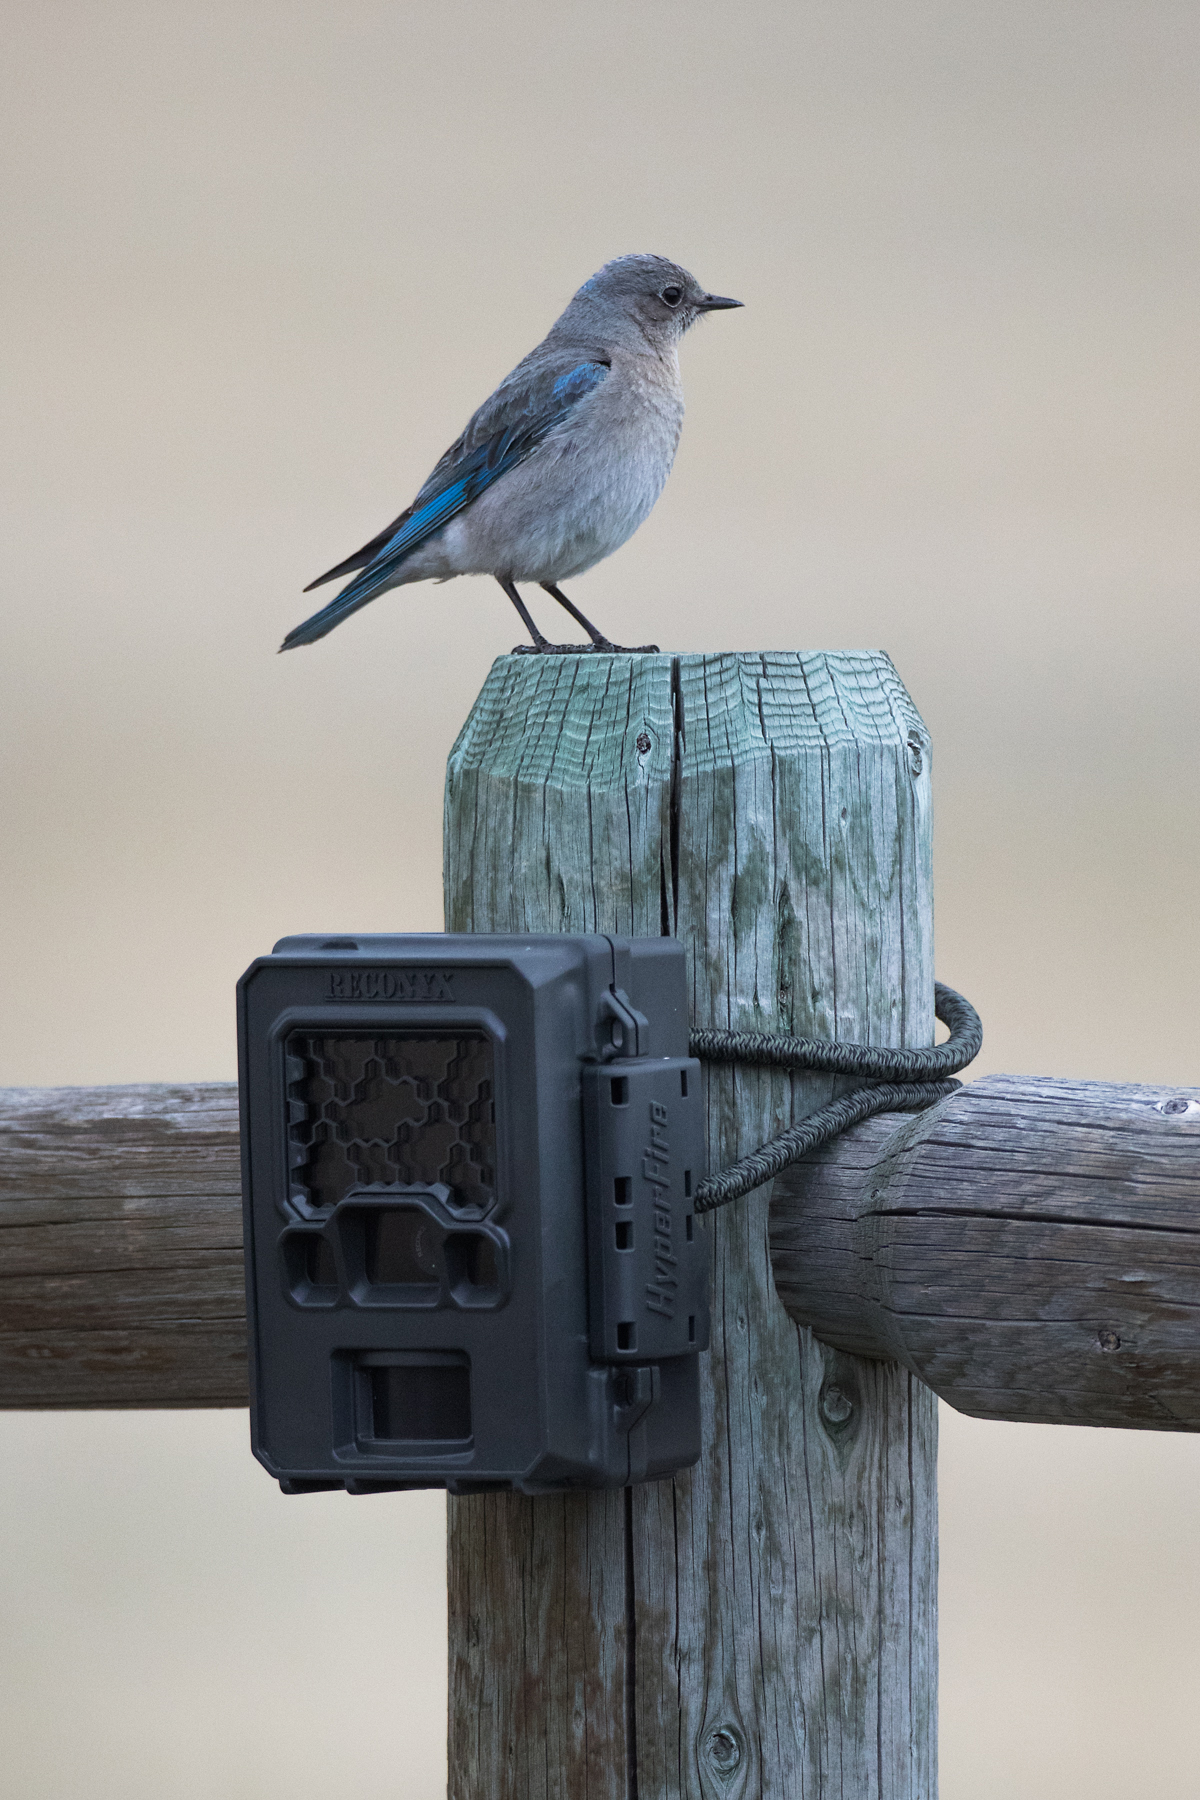 Bluebird shown with Reconyx trailcam, Red Lodge, Montana, May 2021.  Click for next photo.